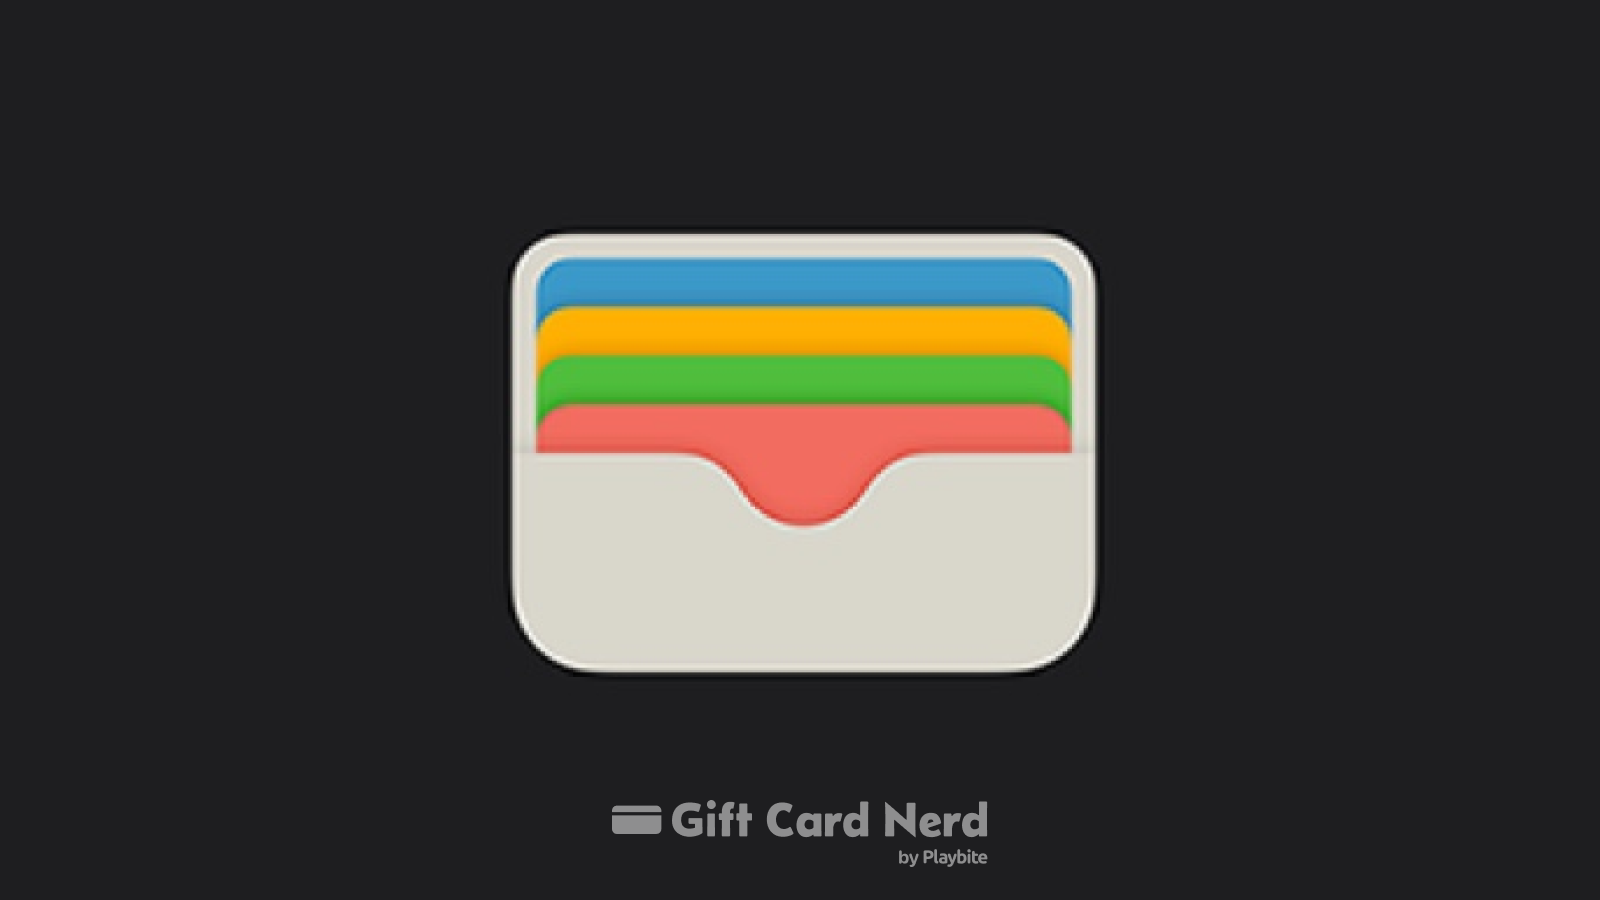 Can I Use an Apple Gift Card on Paypal?